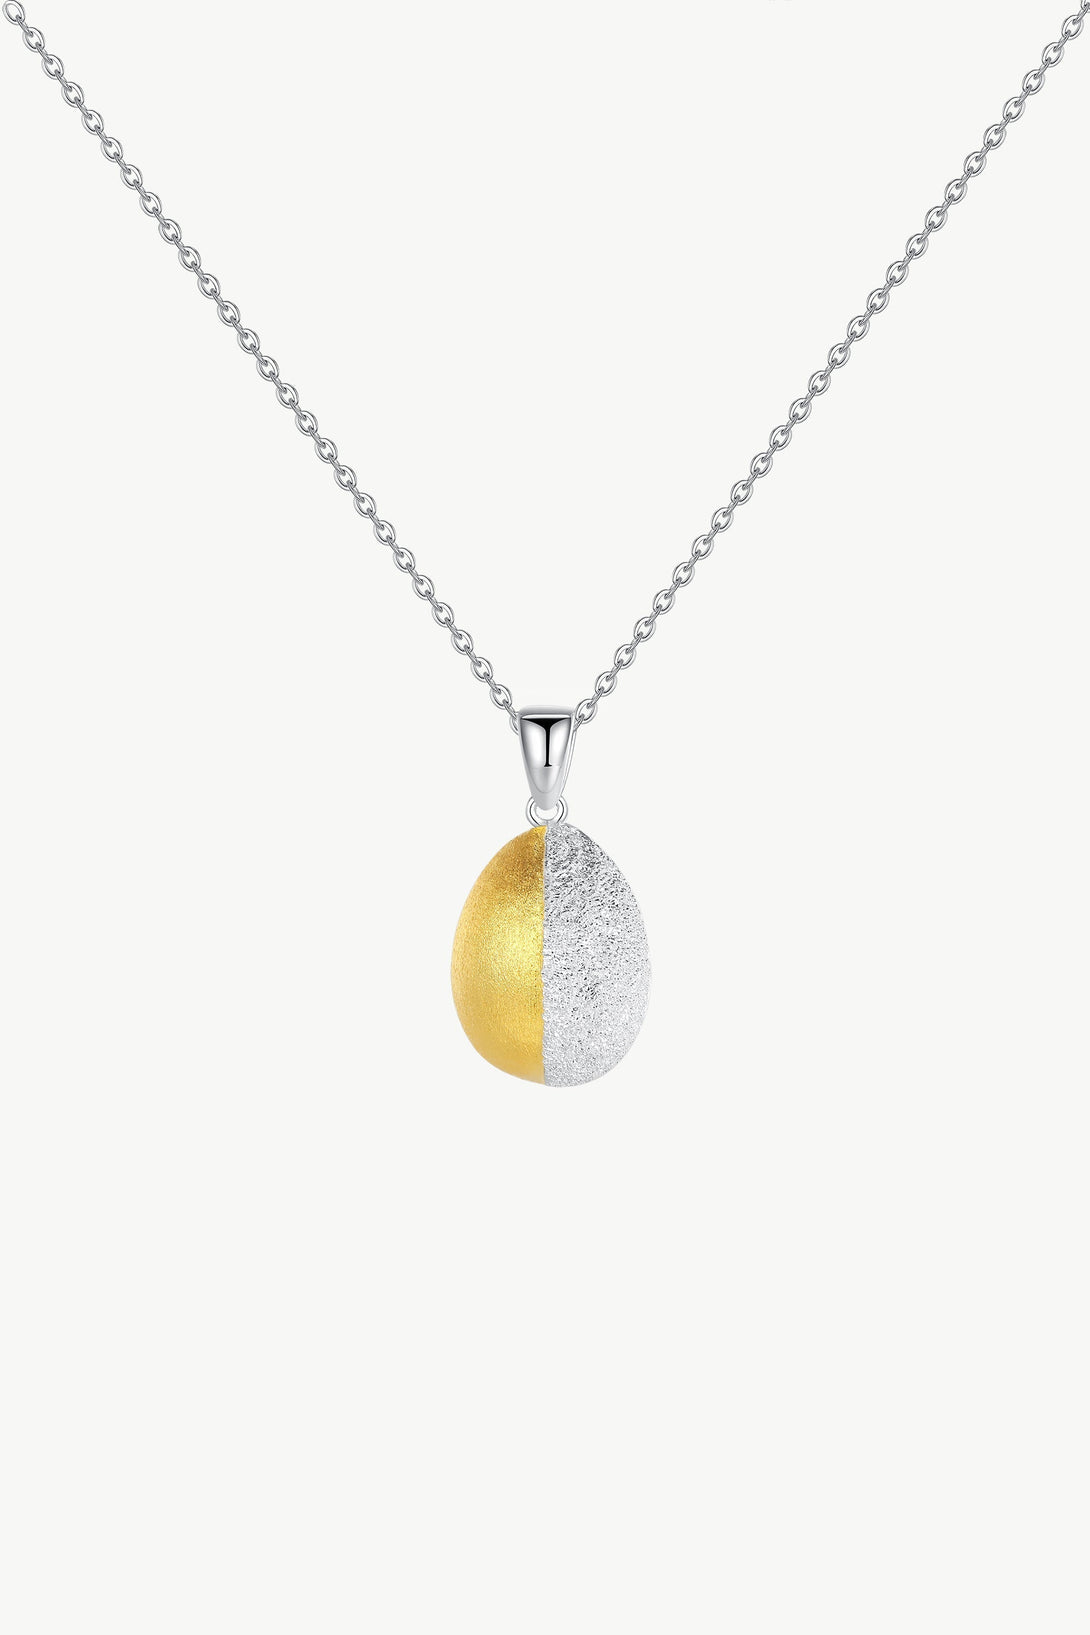 Frosted and Matted Texture Two Tone Pendant Necklace - Classicharms